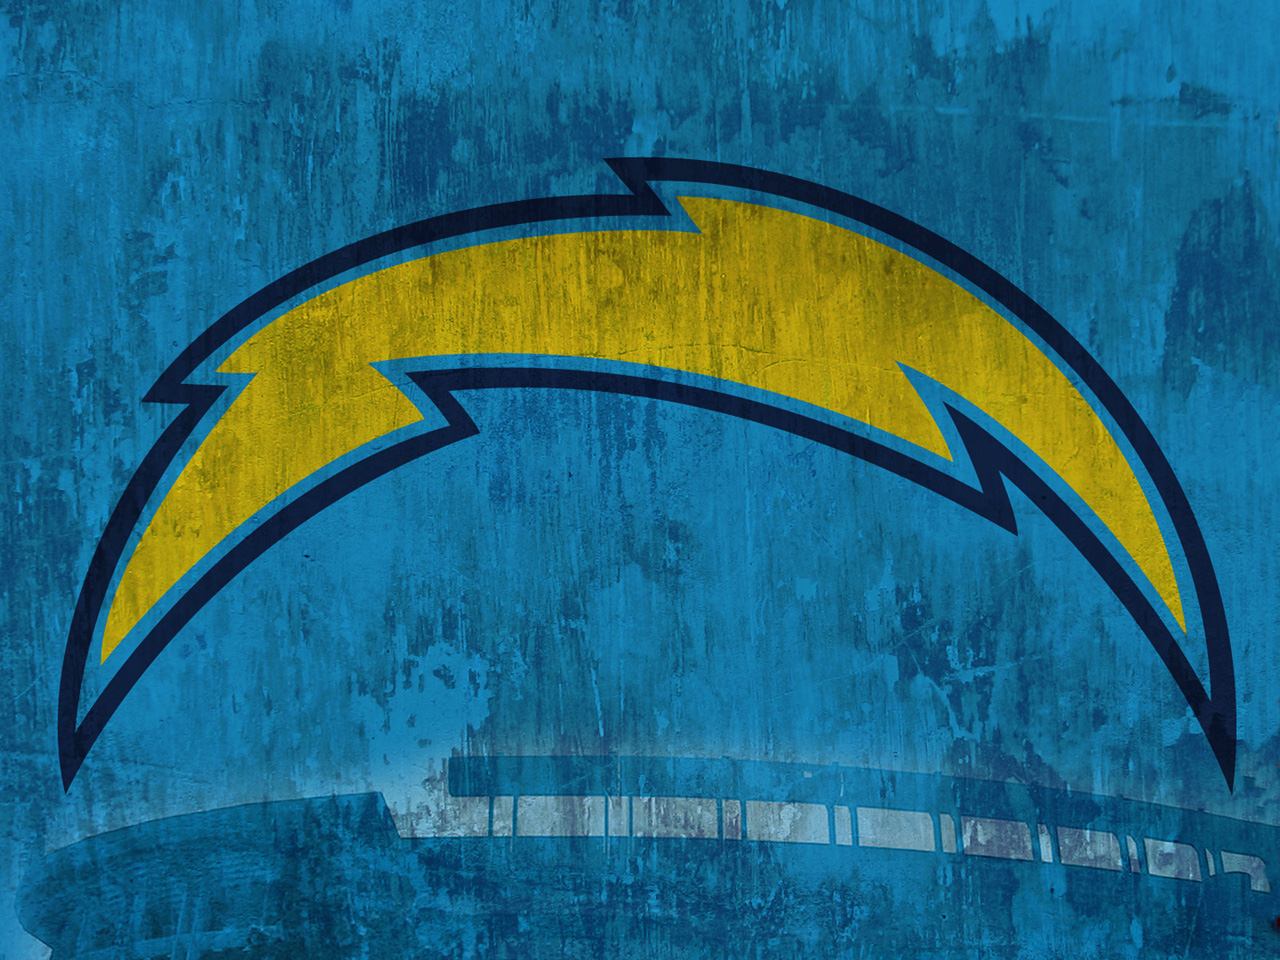 sports, los angeles chargers